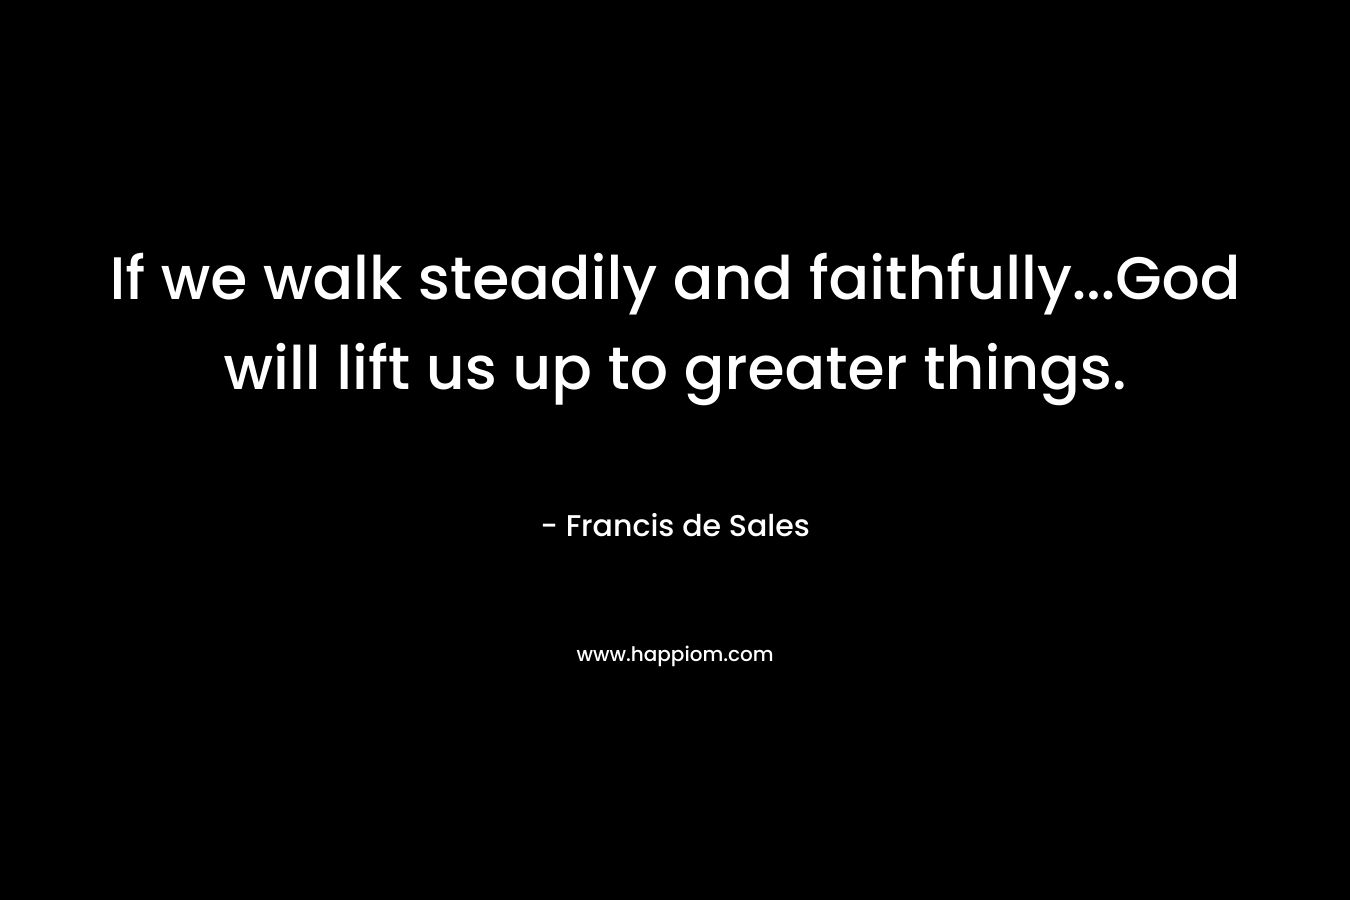 If we walk steadily and faithfully...God will lift us up to greater things.